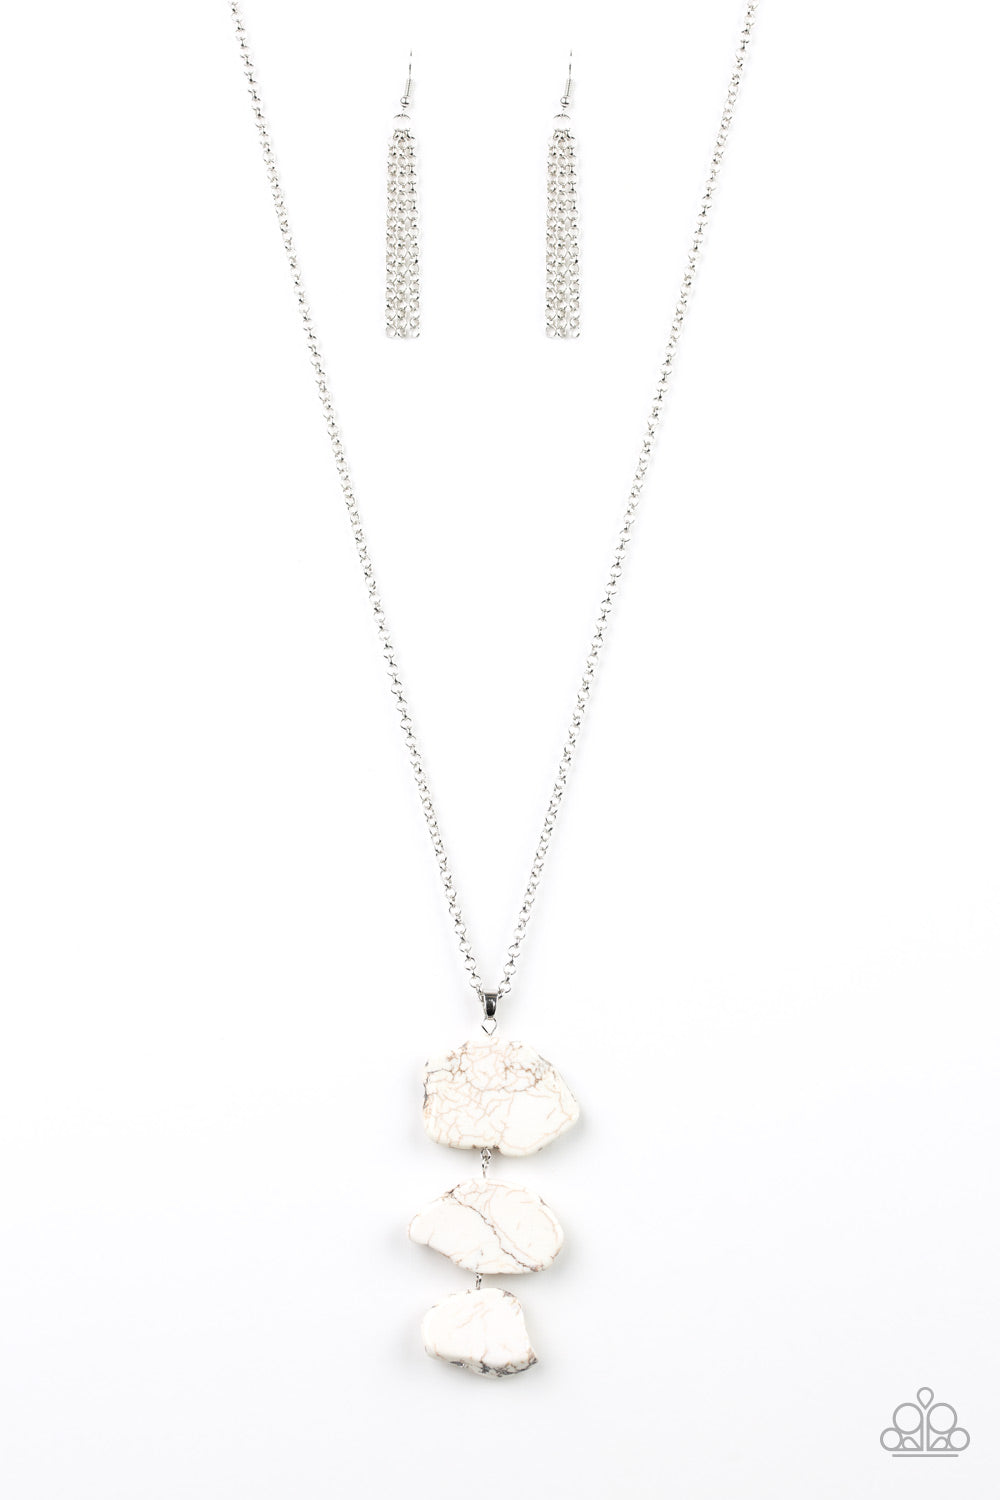 Paparazzi Accessories - On The ROAM Again - White & Silver Necklace